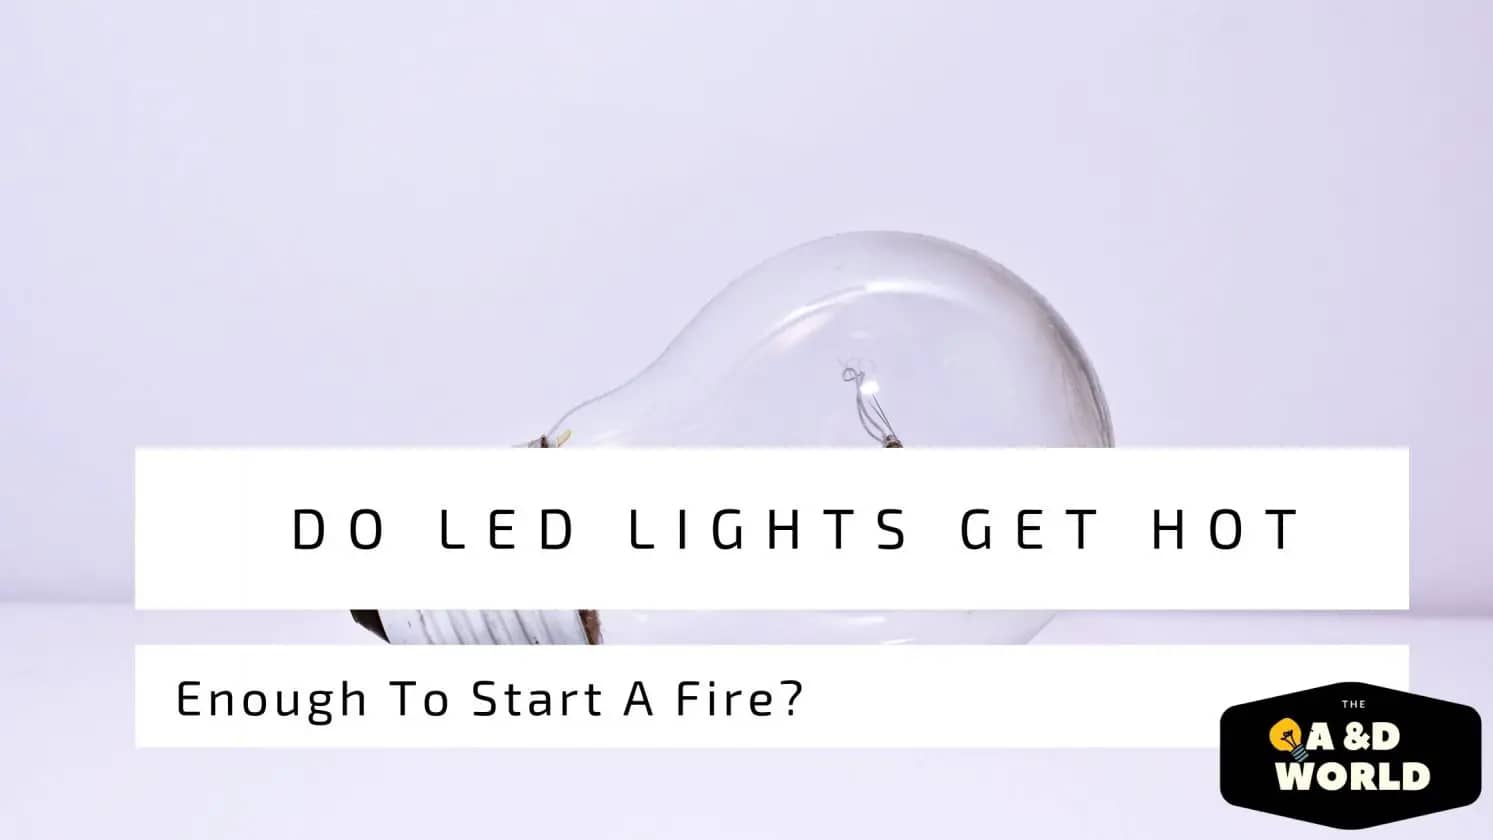 Do LED Lights Get Hot Enough To Start A Fire?